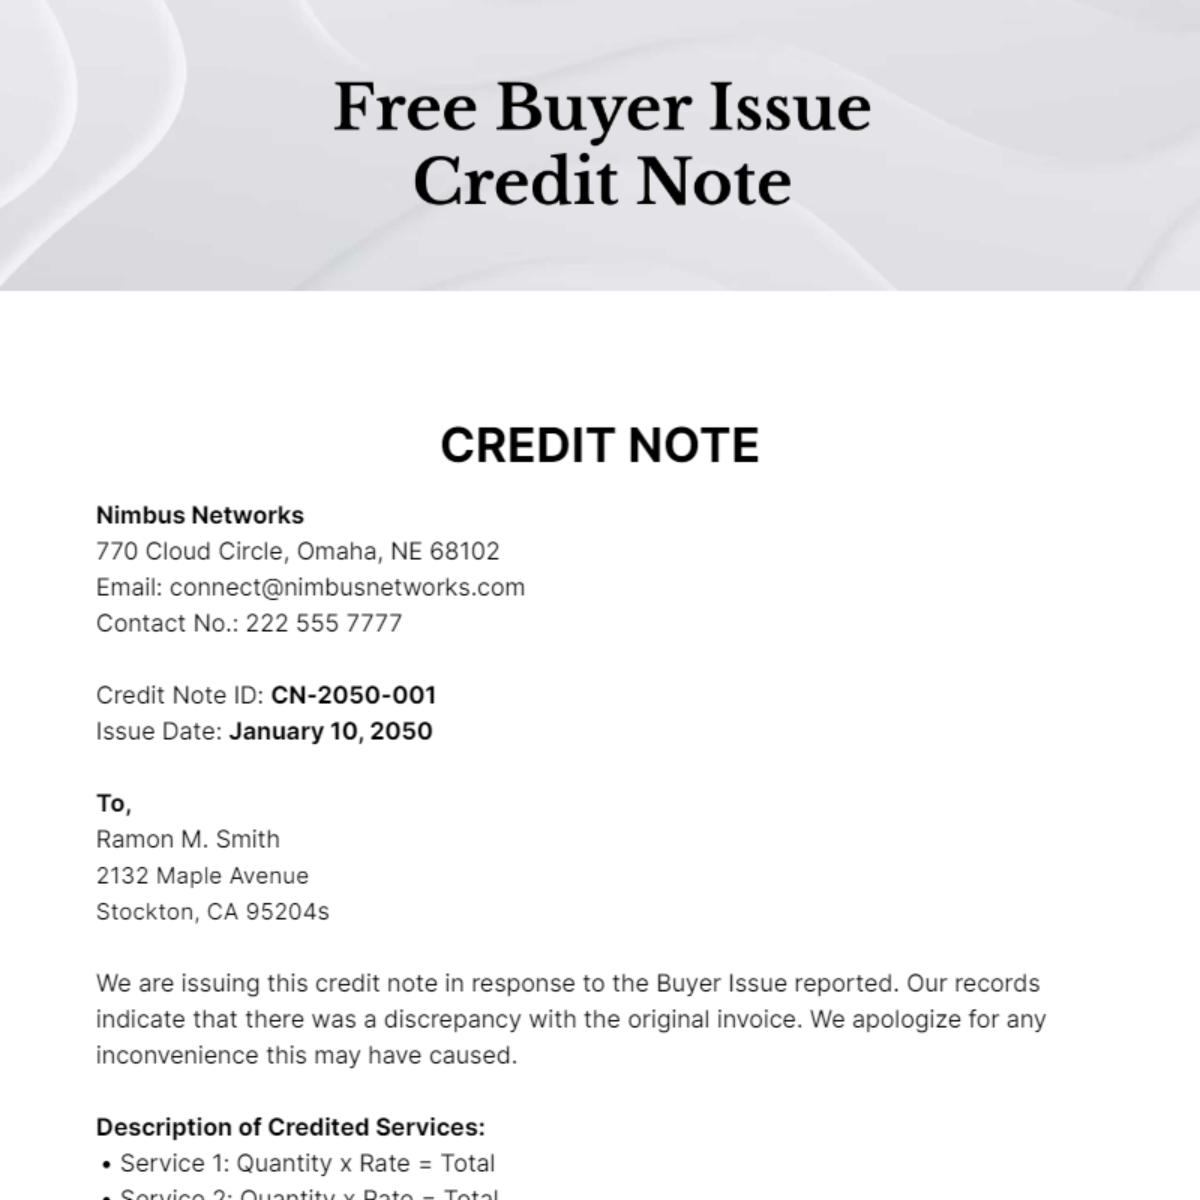 Free Buyer Issue Credit Note Template